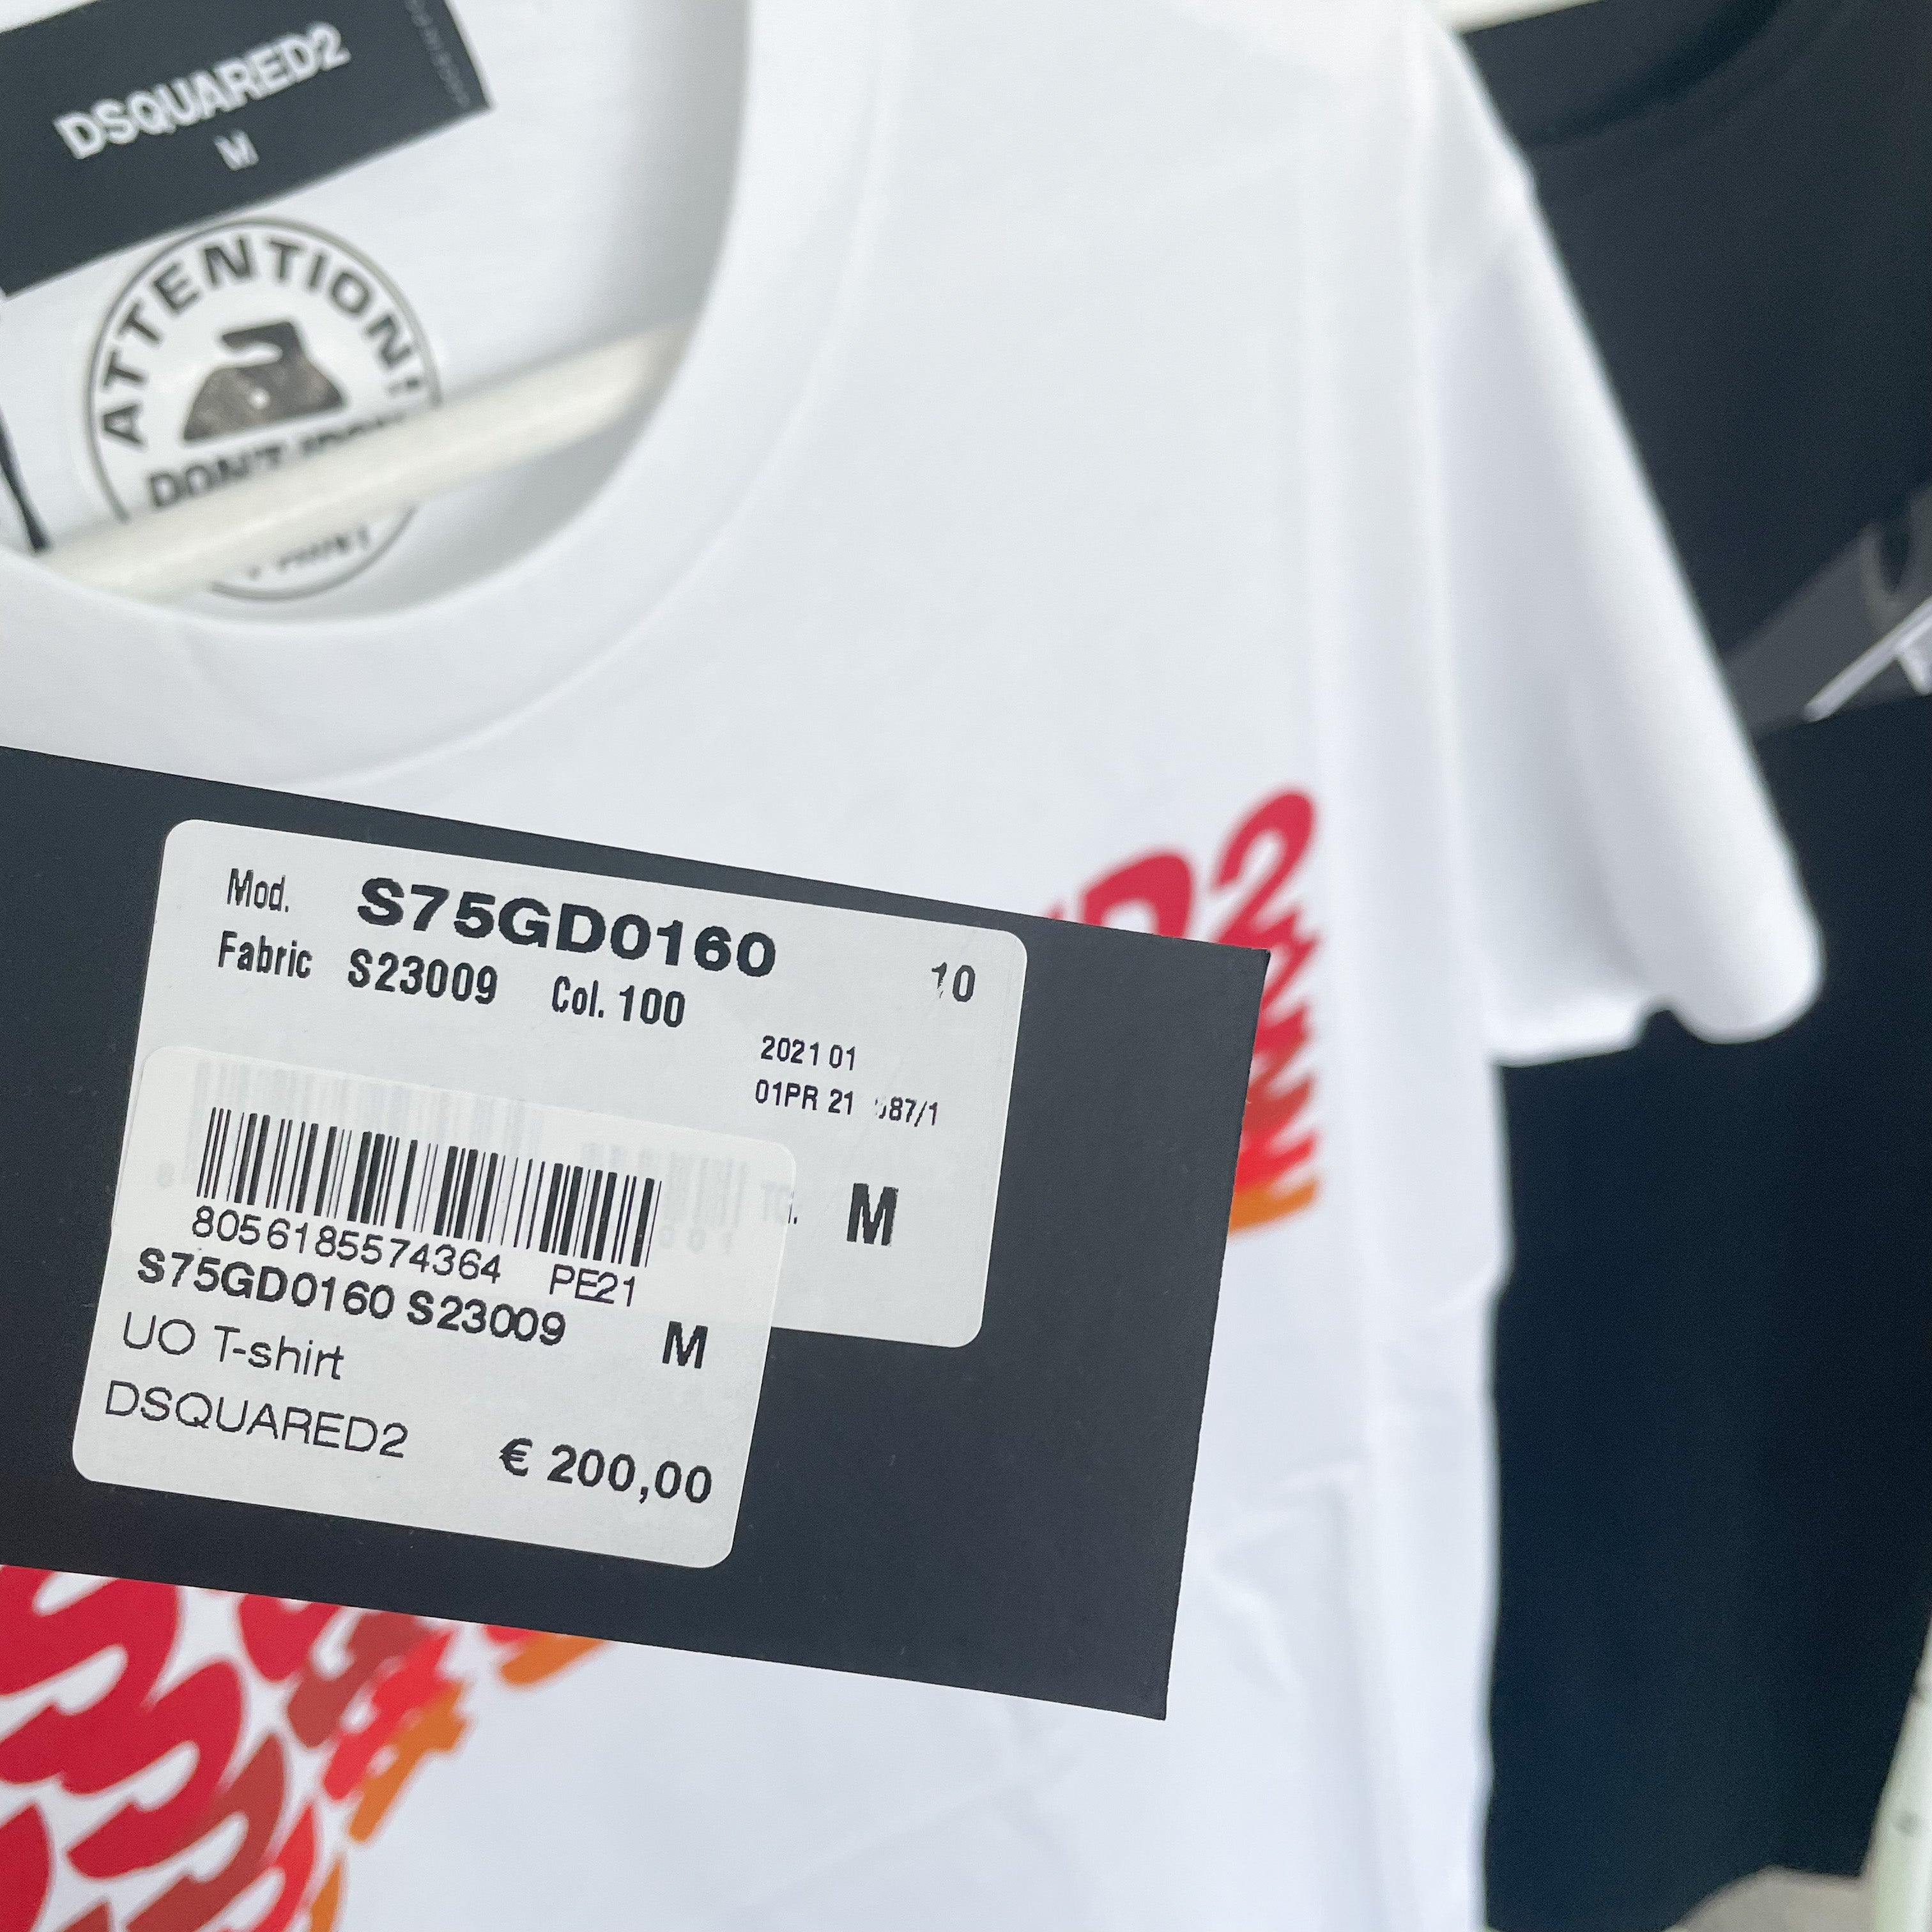 Dsquared Gradient Logo Tee - White / Red